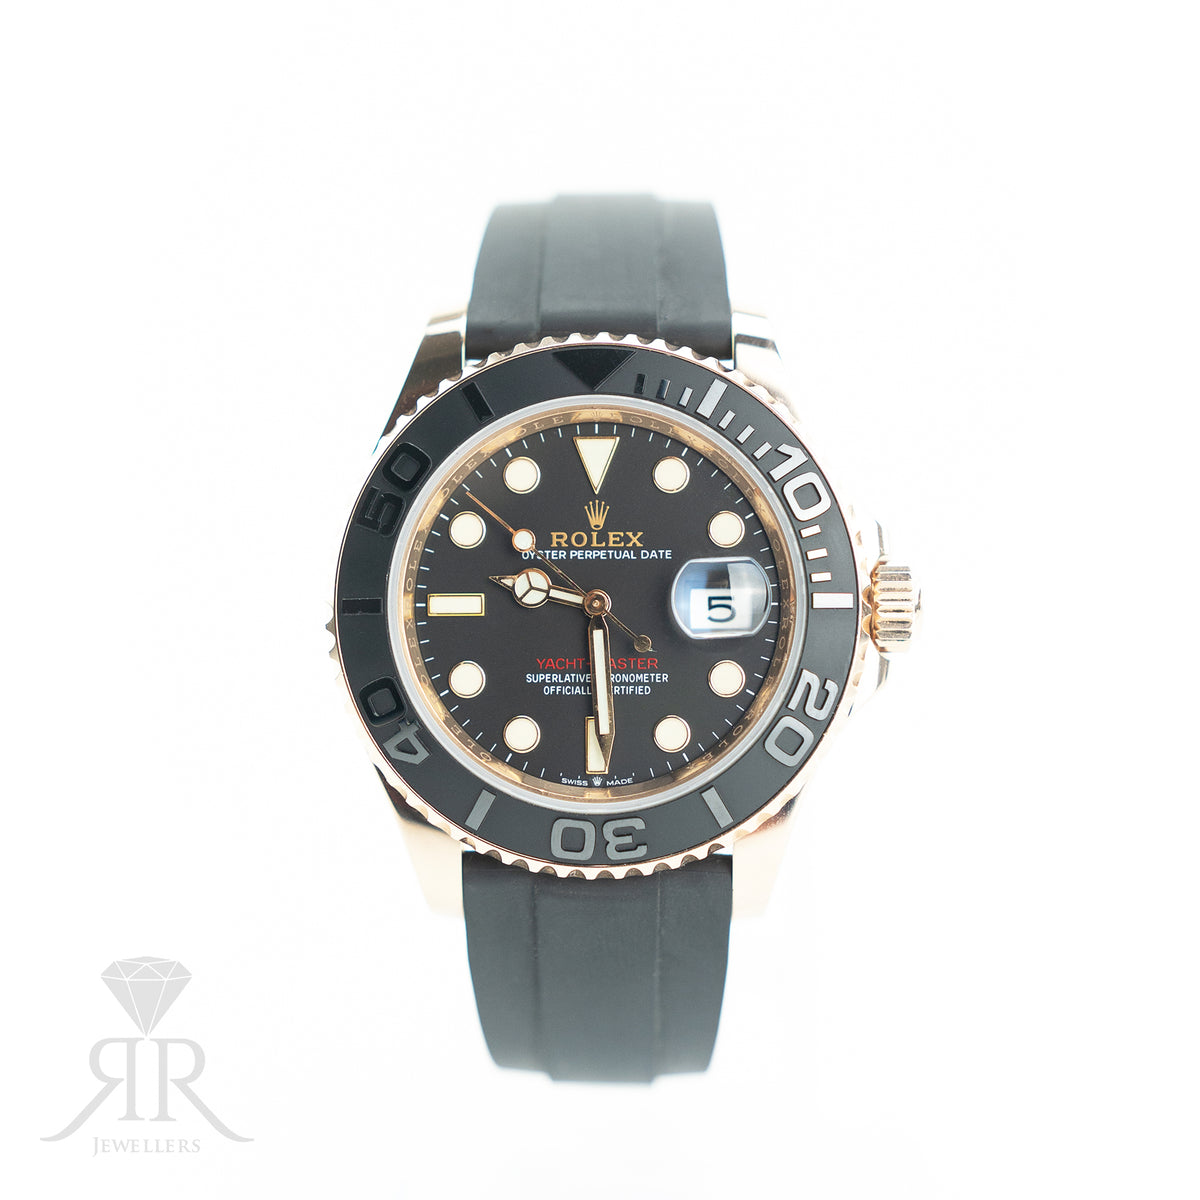 2022 Rolex YACHT-MASTER 18K Everose Gold, Oysterflex, 40mm 116655 available at RR Jewellers Yarm